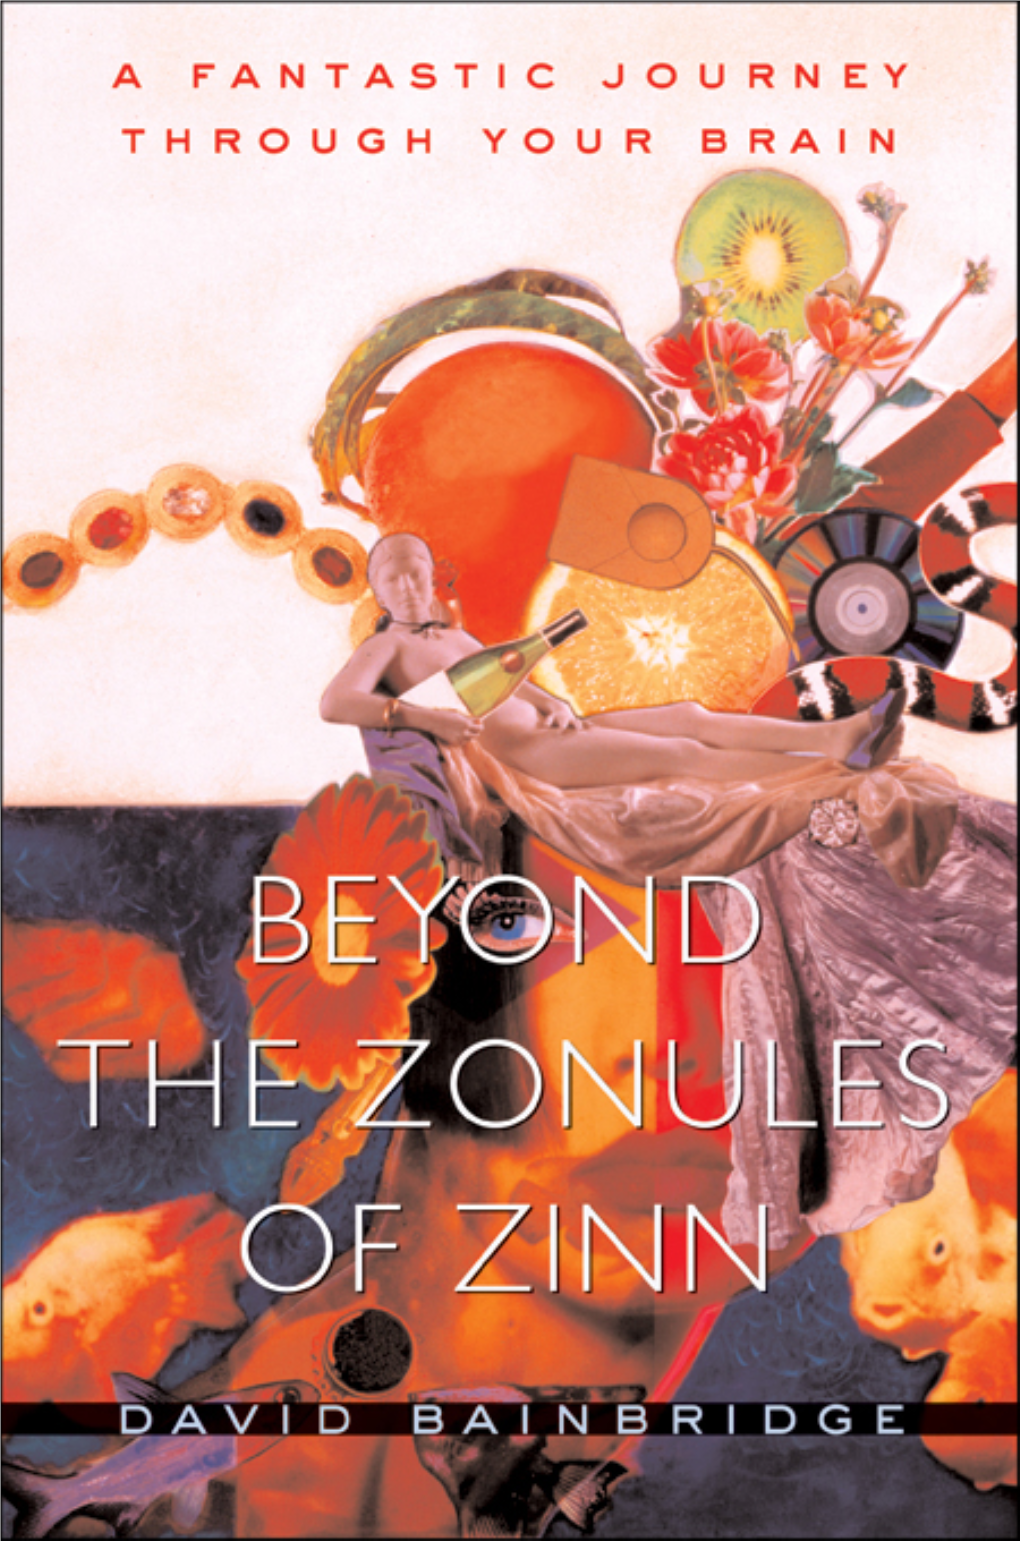 Beyond the Zonules of Zinn: the Fantastic Journey Through Your Brain